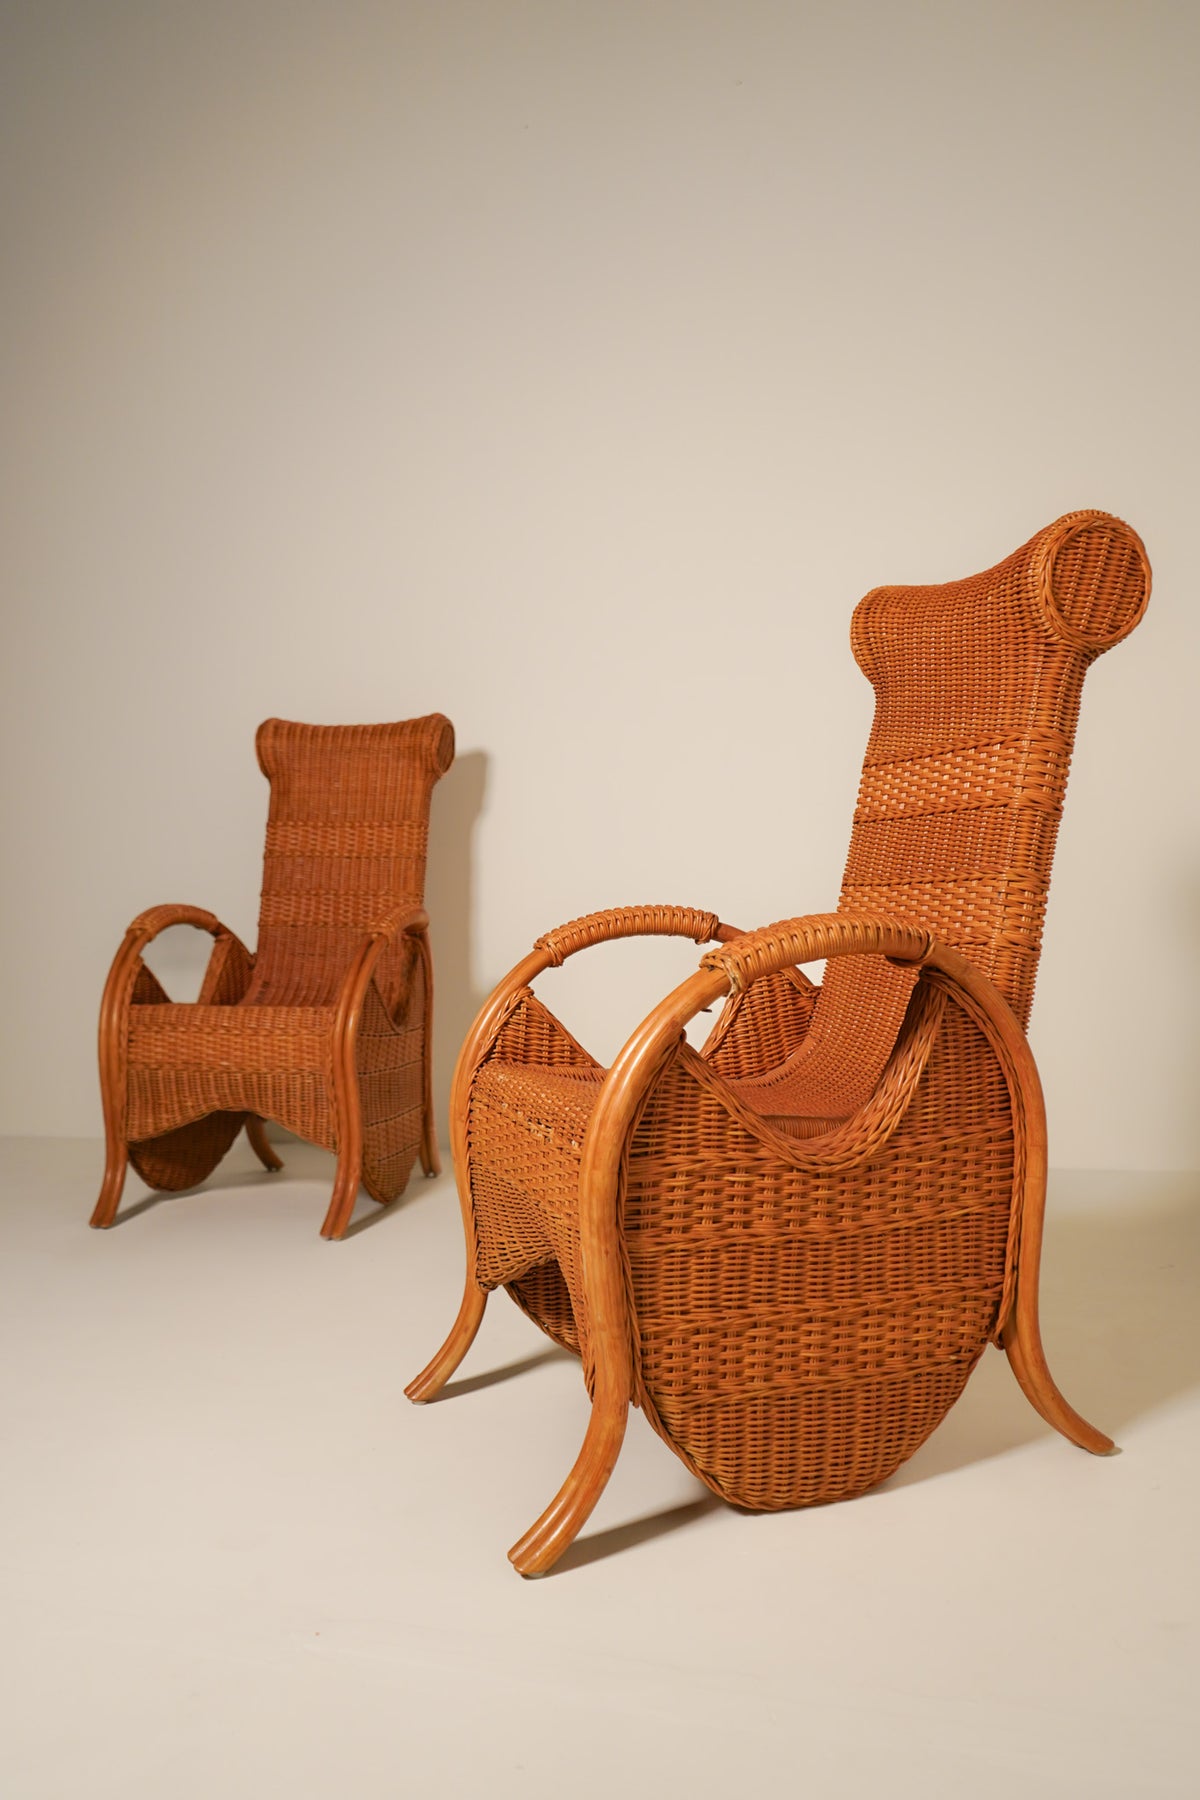 Sculpted Wicker & Rattan Chairs